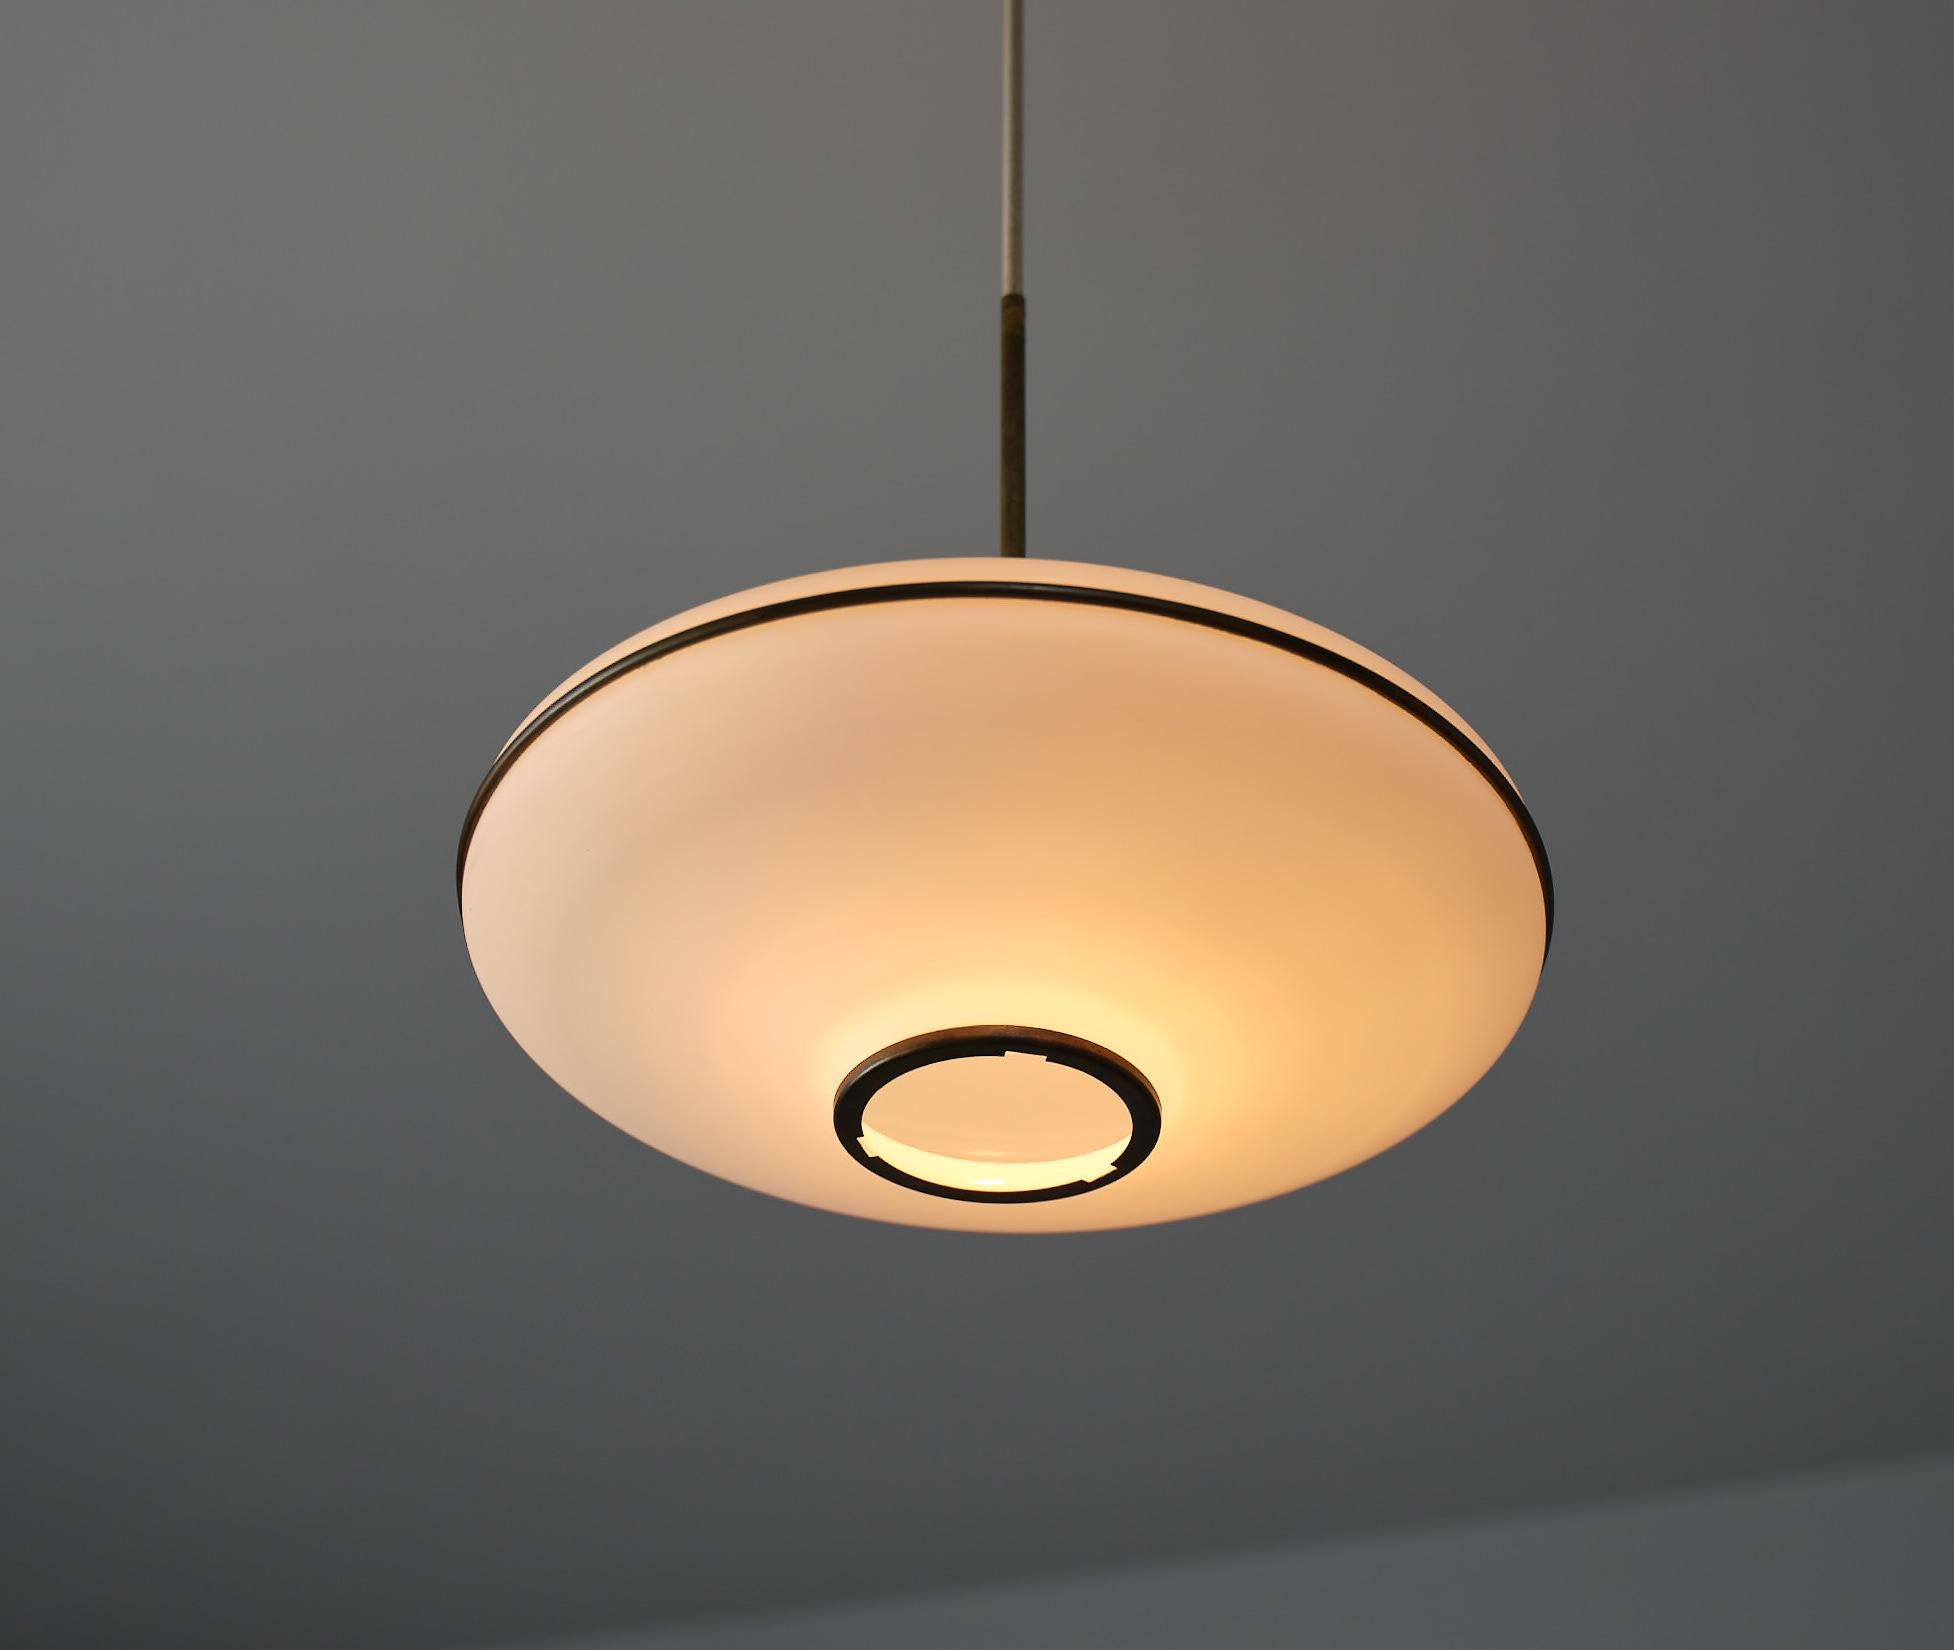 Italian Flying Saucer Pendant Lamp - Vintage 1950s Modernist Ceiling Light In Good Condition For Sale In Rome, IT